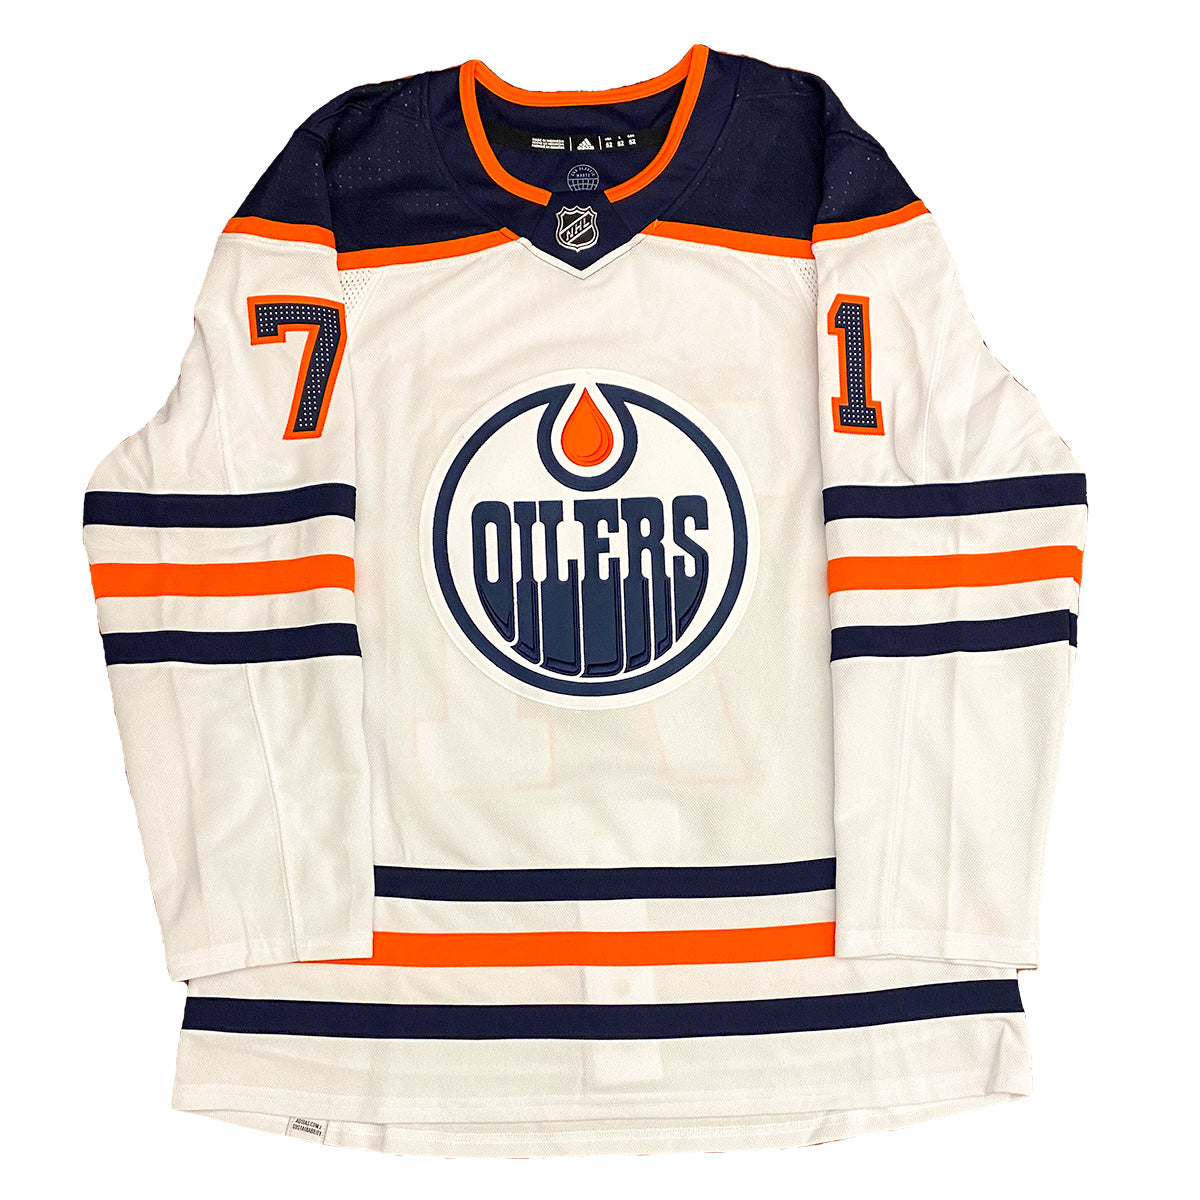 Sold at Auction: CONNOR MCDAVID SIGNED EDMONTON OILERS ADIDAS